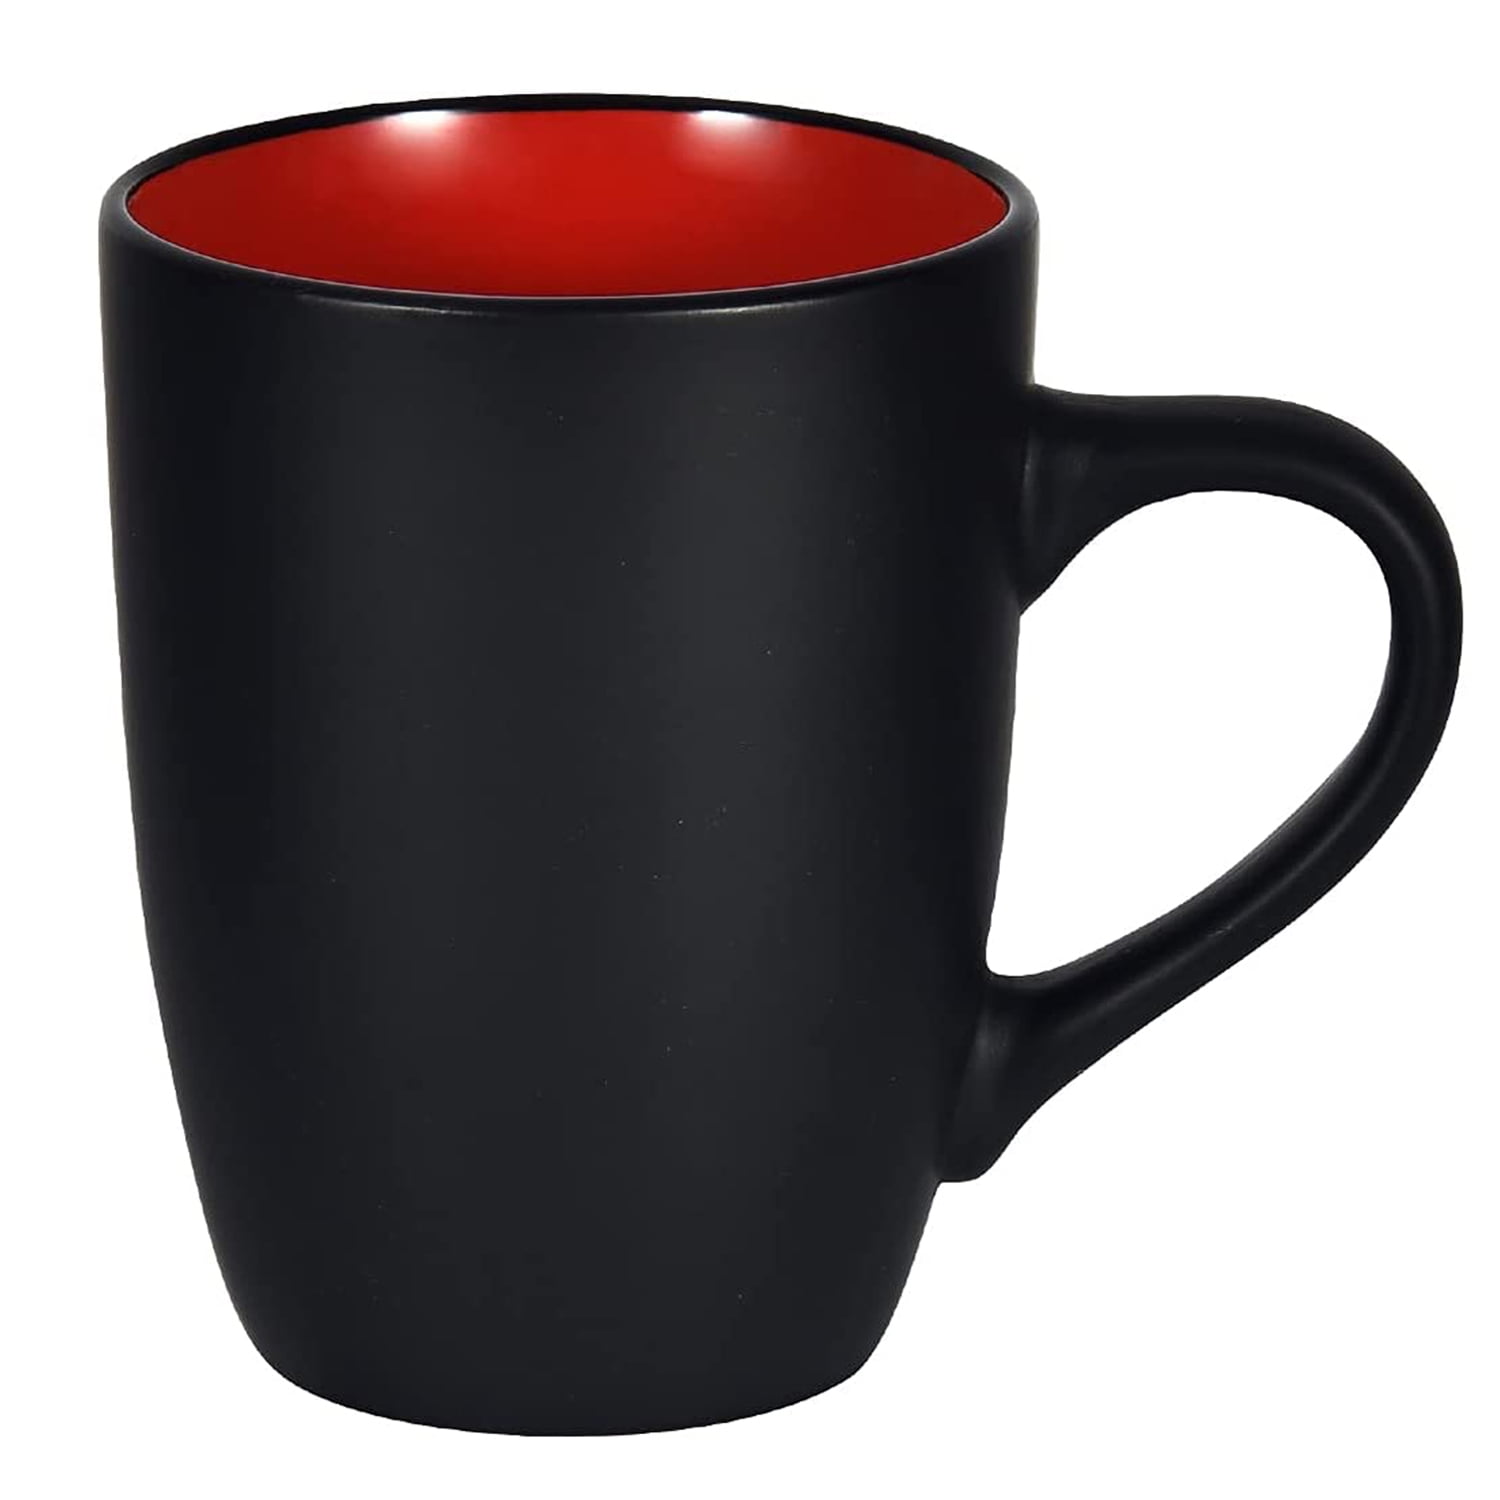 Modwnfy 16 fl oz Red Coffee Mugs Ceramic Coffee Mug Tea Cups, Black Exterior Red Color Interior Ceramic Coffee Mugs, Large Ceramic Coffee Cup for Coffee, Tea, Cocoa, Cereal, Office and Home - image 1 of 10